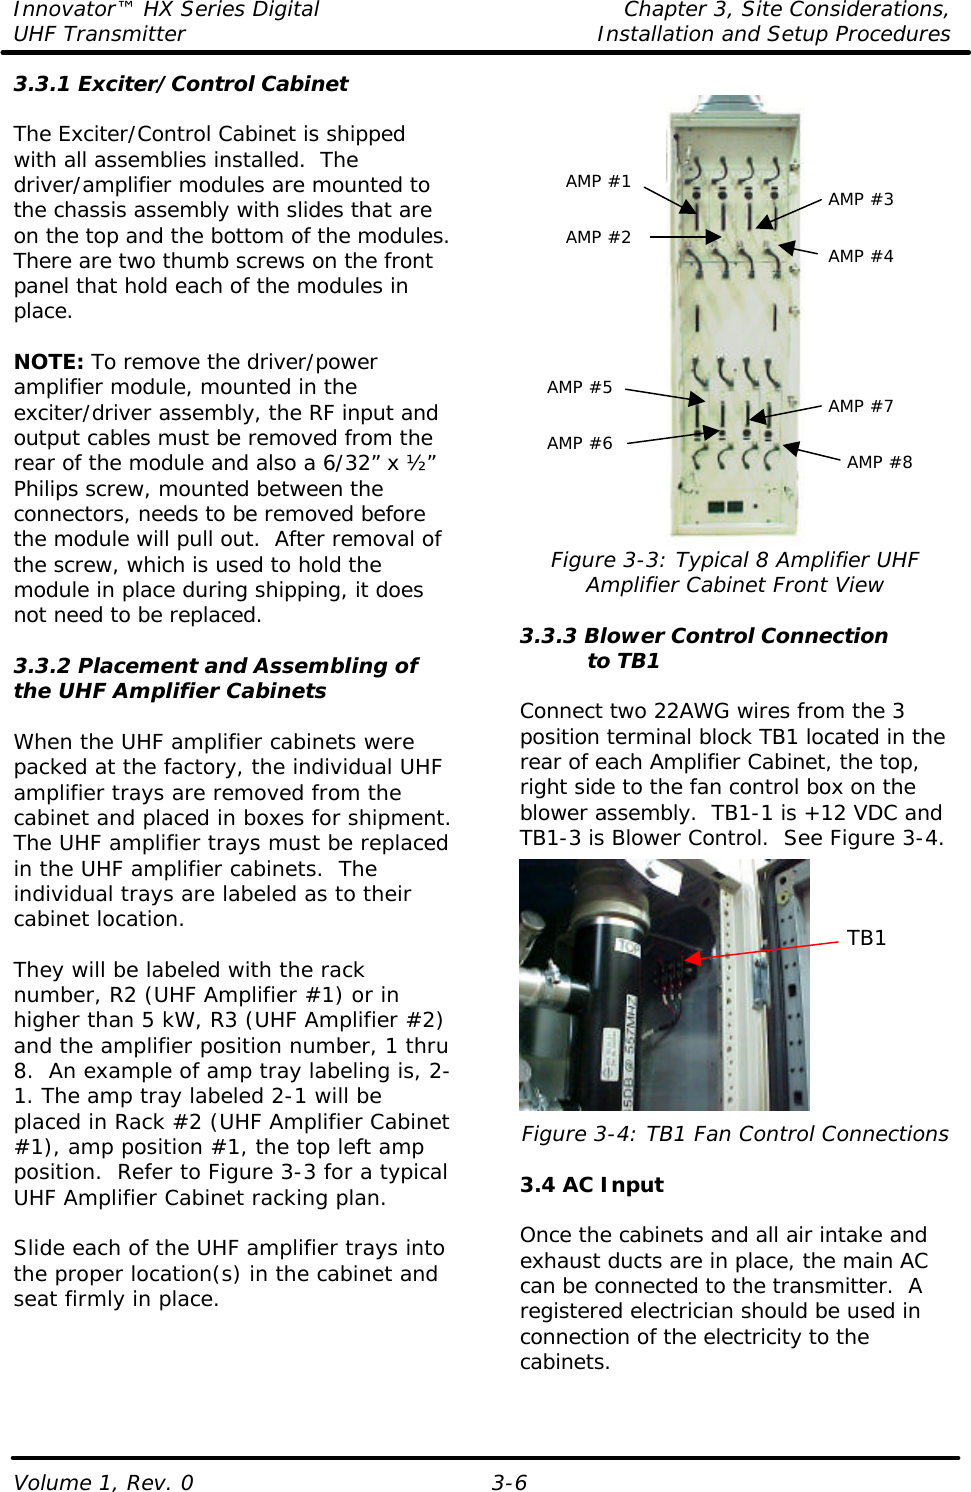 Innovator™ HX Series Digital    Chapter 3, Site Considerations, UHF Transmitter Installation and Setup Procedures Volume 1, Rev. 0  3-6 3.3.1 Exciter/Control Cabinet  The Exciter/Control Cabinet is shipped with all assemblies installed.  The driver/amplifier modules are mounted to the chassis assembly with slides that are on the top and the bottom of the modules.  There are two thumb screws on the front panel that hold each of the modules in place.    NOTE: To remove the driver/power amplifier module, mounted in the exciter/driver assembly, the RF input and output cables must be removed from the rear of the module and also a 6/32” x ½” Philips screw, mounted between the connectors, needs to be removed before the module will pull out.  After removal of the screw, which is used to hold the module in place during shipping, it does not need to be replaced.   3.3.2 Placement and Assembling of the UHF Amplifier Cabinets  When the UHF amplifier cabinets were packed at the factory, the individual UHF amplifier trays are removed from the cabinet and placed in boxes for shipment.  The UHF amplifier trays must be replaced in the UHF amplifier cabinets.  The individual trays are labeled as to their cabinet location.   They will be labeled with the rack number, R2 (UHF Amplifier #1) or in higher than 5 kW, R3 (UHF Amplifier #2) and the amplifier position number, 1 thru 8.  An example of amp tray labeling is, 2-1. The amp tray labeled 2-1 will be placed in Rack #2 (UHF Amplifier Cabinet #1), amp position #1, the top left amp position.  Refer to Figure 3-3 for a typical UHF Amplifier Cabinet racking plan.  Slide each of the UHF amplifier trays into the proper location(s) in the cabinet and seat firmly in place.   Figure 3-3: Typical 8 Amplifier UHF Amplifier Cabinet Front View  3.3.3 Blower Control Connection           to TB1  Connect two 22AWG wires from the 3 position terminal block TB1 located in the rear of each Amplifier Cabinet, the top, right side to the fan control box on the blower assembly.  TB1-1 is +12 VDC and TB1-3 is Blower Control.  See Figure 3-4.  Figure 3-4: TB1 Fan Control Connections  3.4 AC Input  Once the cabinets and all air intake and exhaust ducts are in place, the main AC can be connected to the transmitter.  A registered electrician should be used in connection of the electricity to the cabinets. TB1 AMP #1 AMP #2 AMP #3 AMP #4 AMP #5 AMP #6 AMP #7 AMP #8 